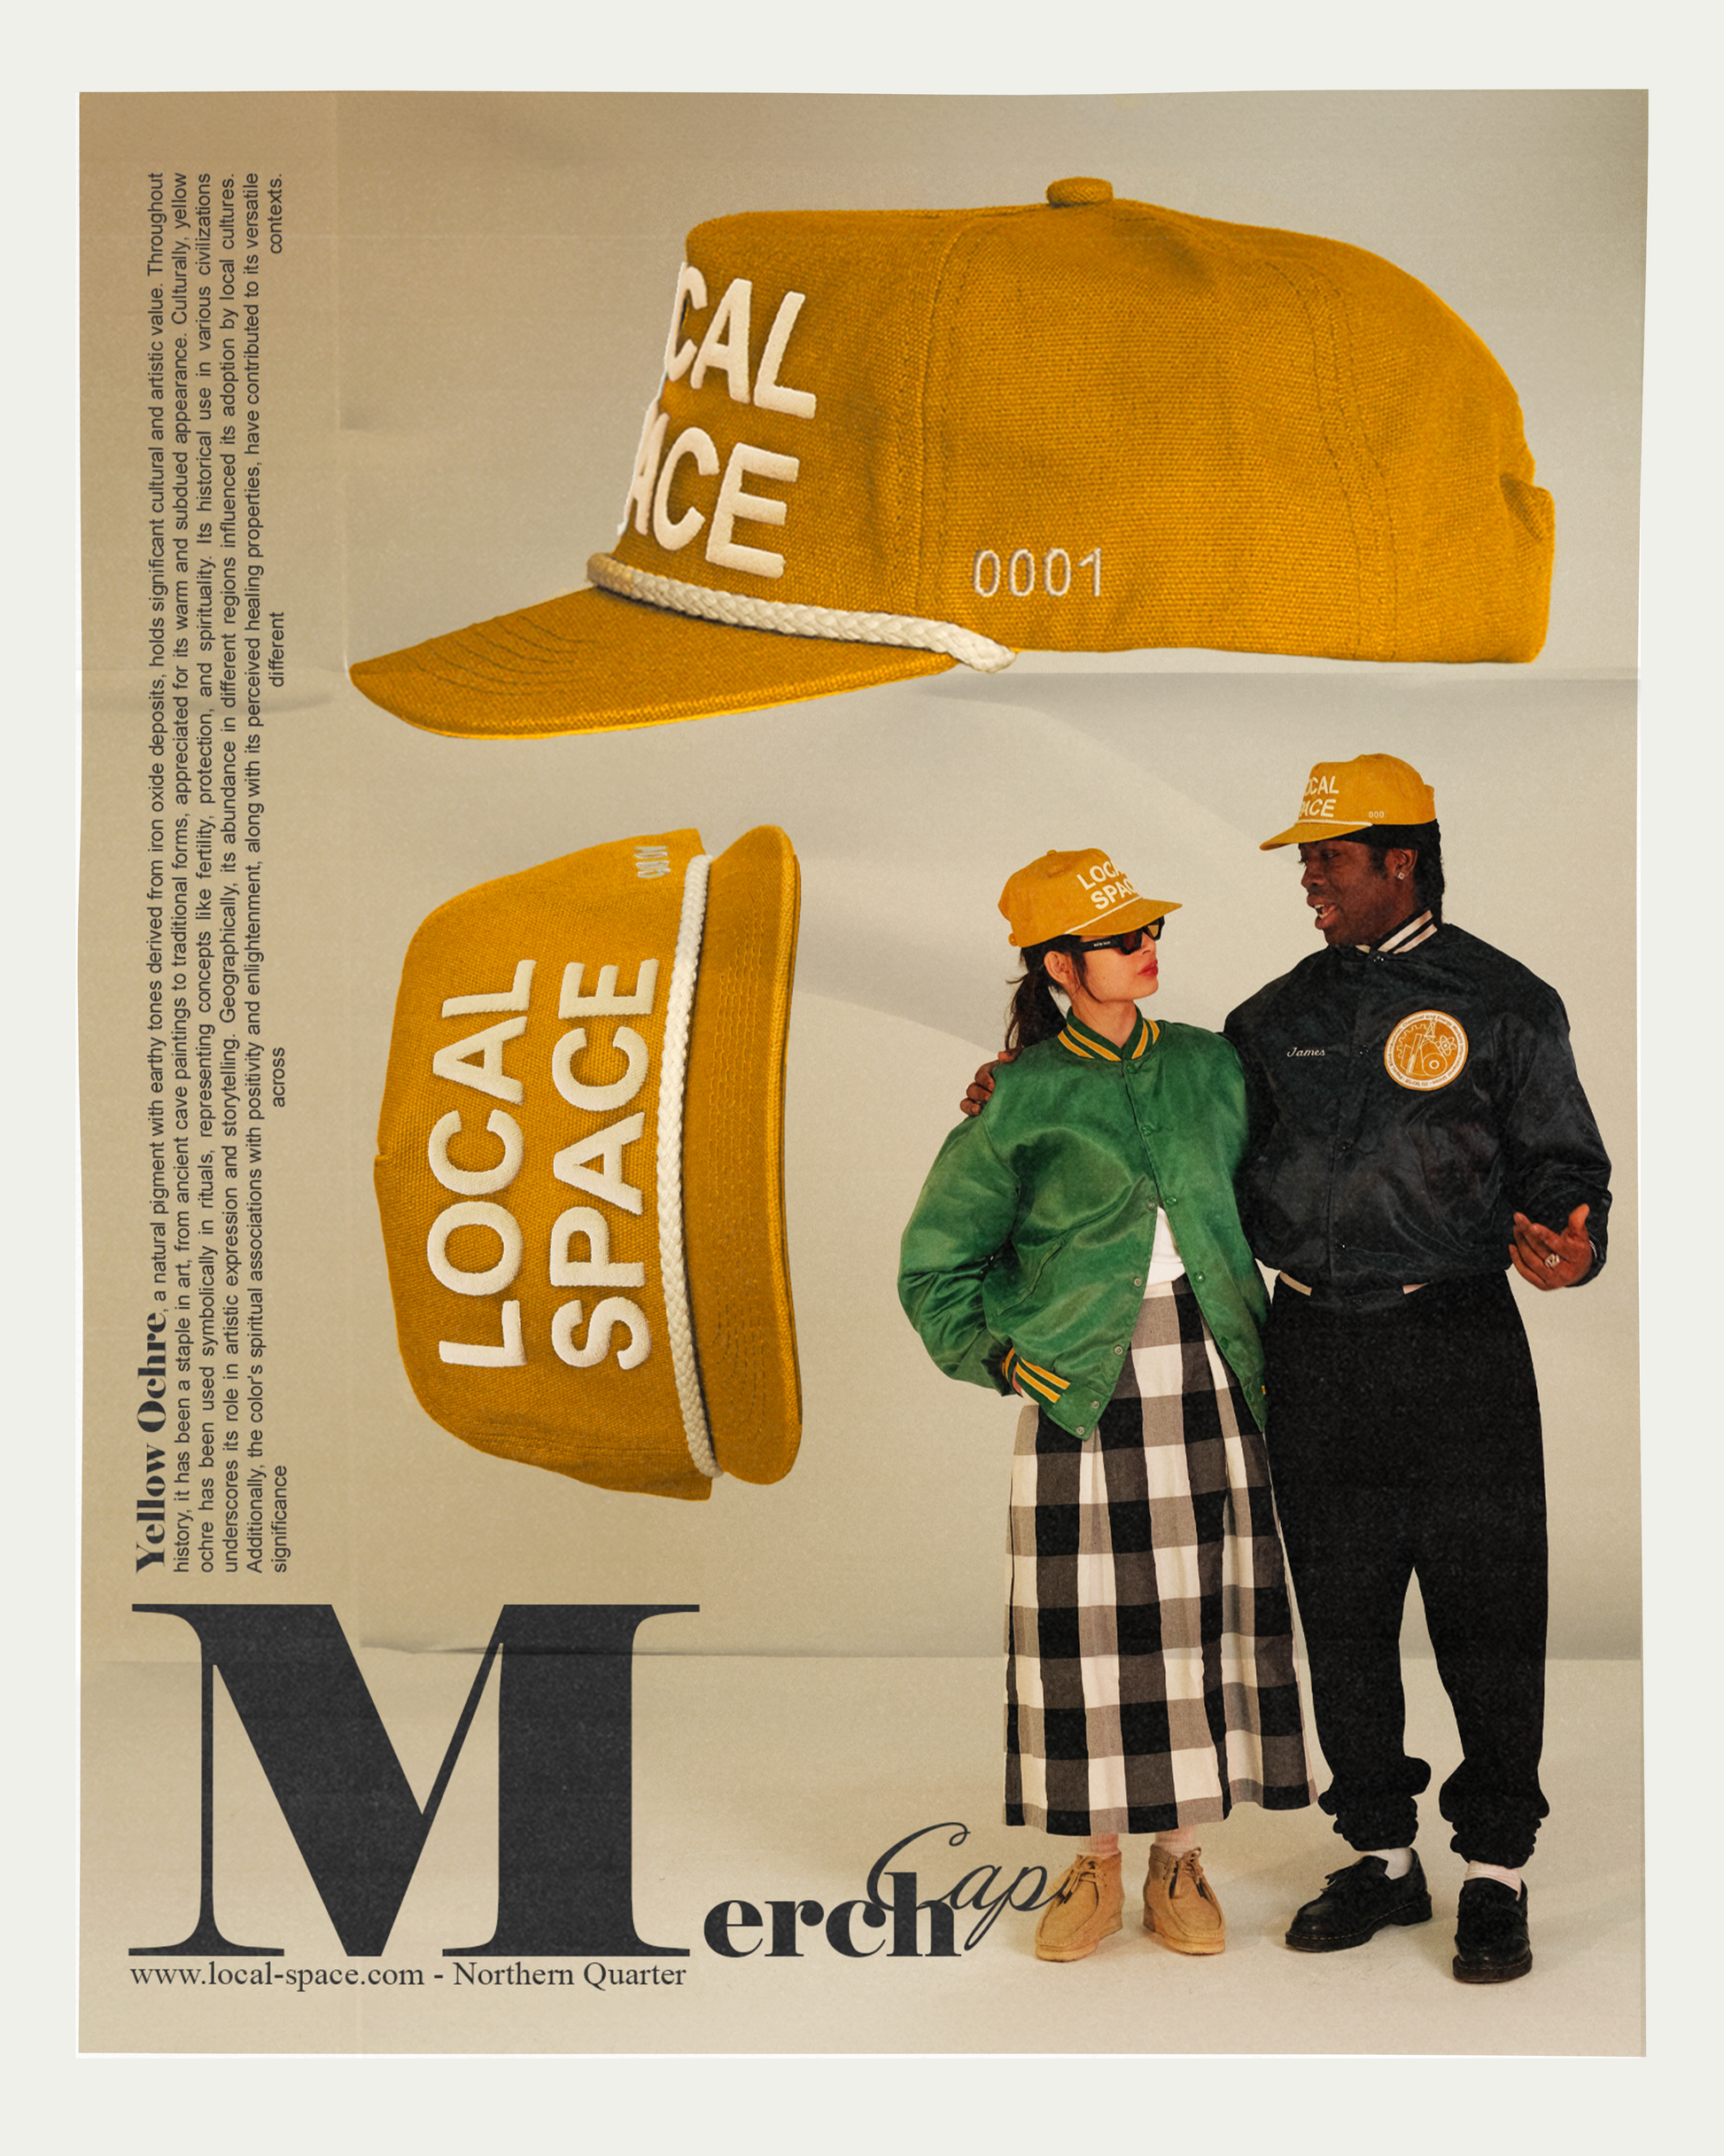 Yellow Orche Merch Cap featuring 'LOCAL SPACE' in puff print on the front, 'ISSUE 0001' embroidery on the side, vintage snapback fit, and a slightly curved brim, made from 100% cotton canvas.